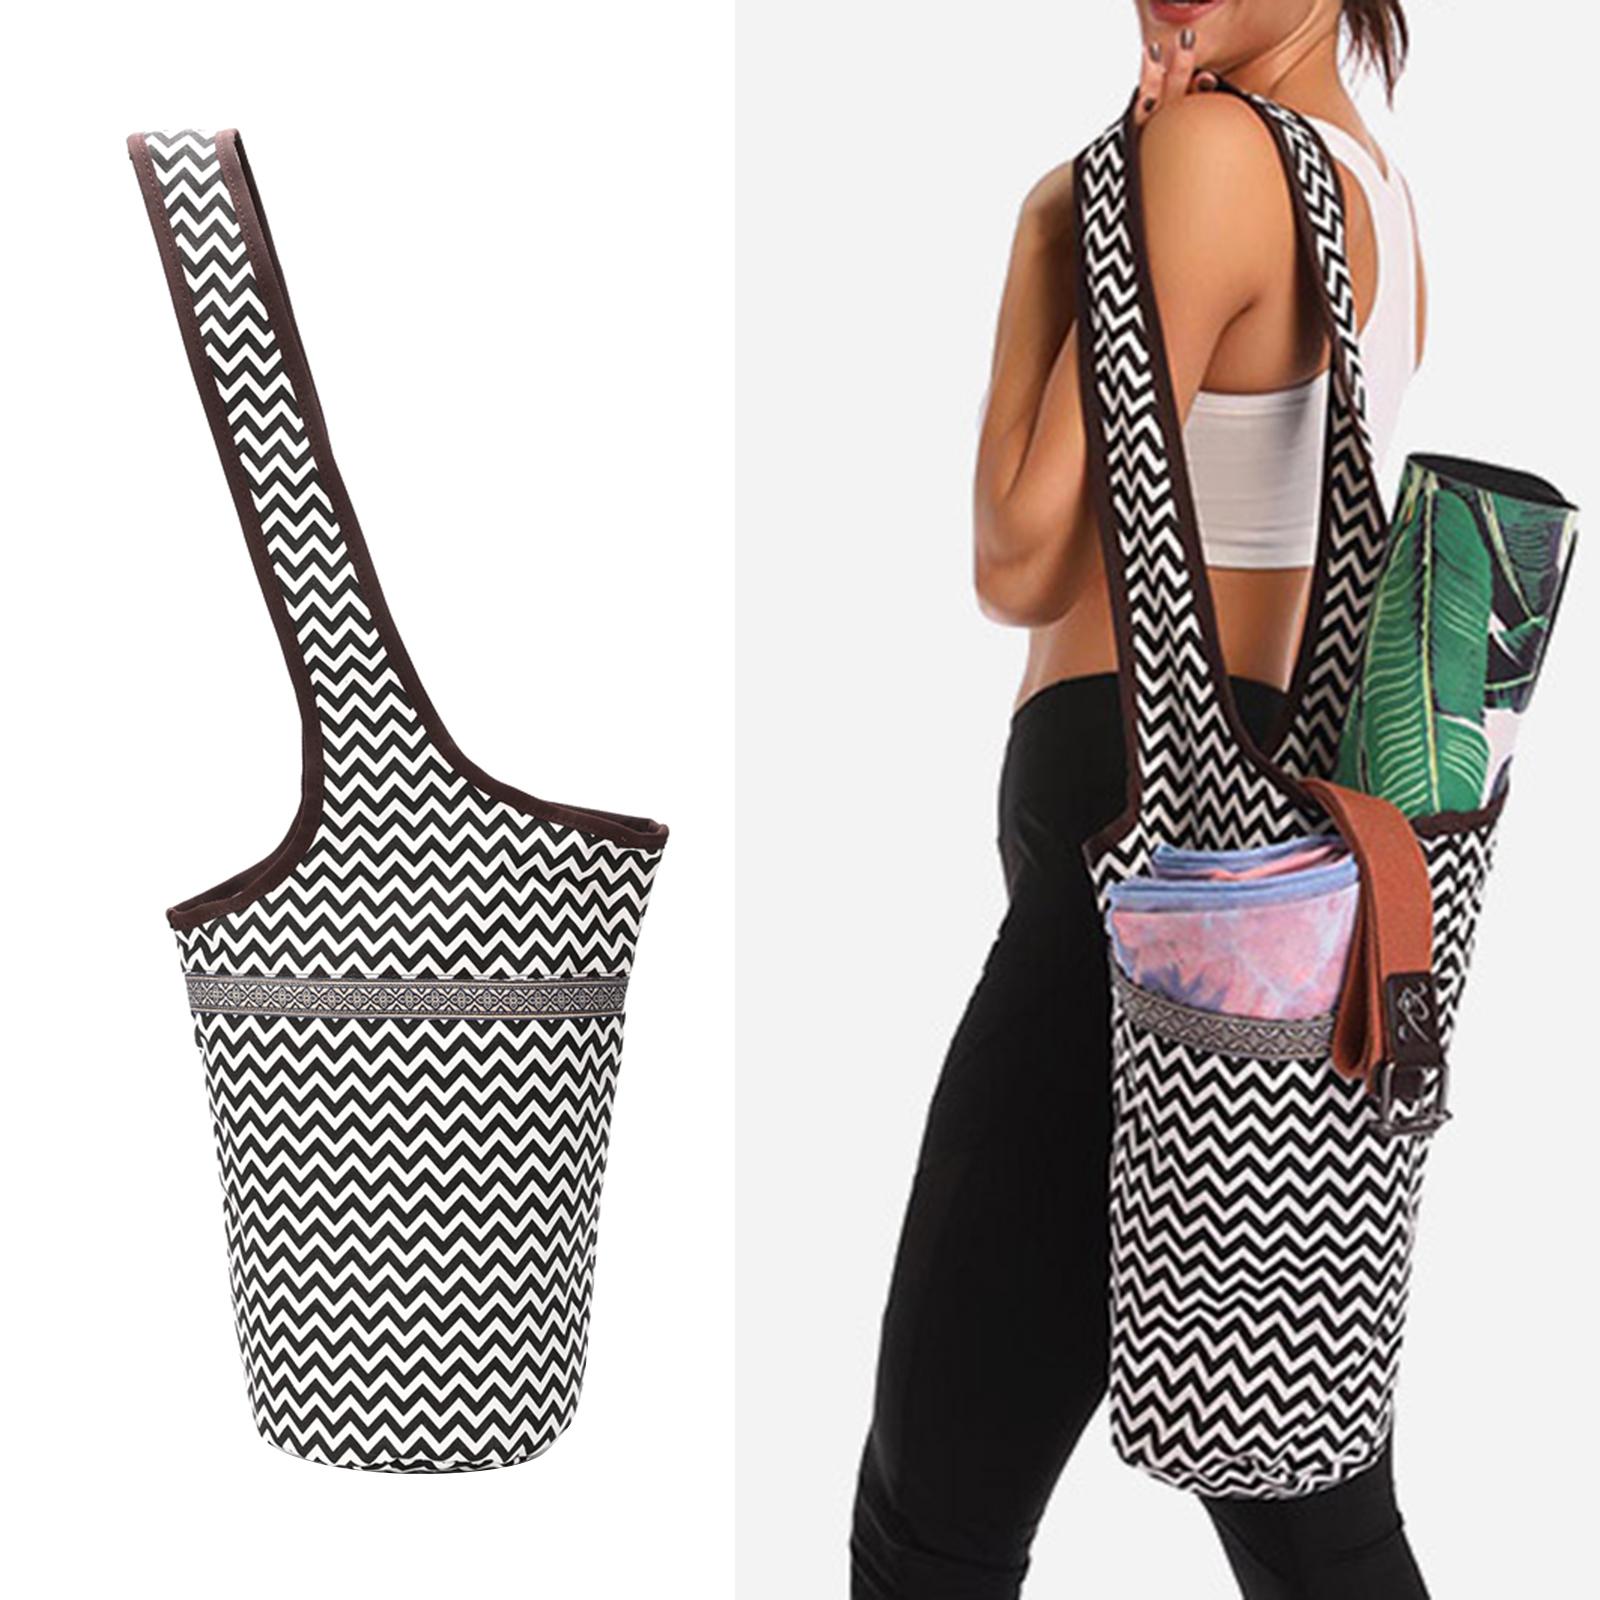 Yoga Mat Bag Large Tote Style a Perfect Carrier for All Your Yoga Needs B